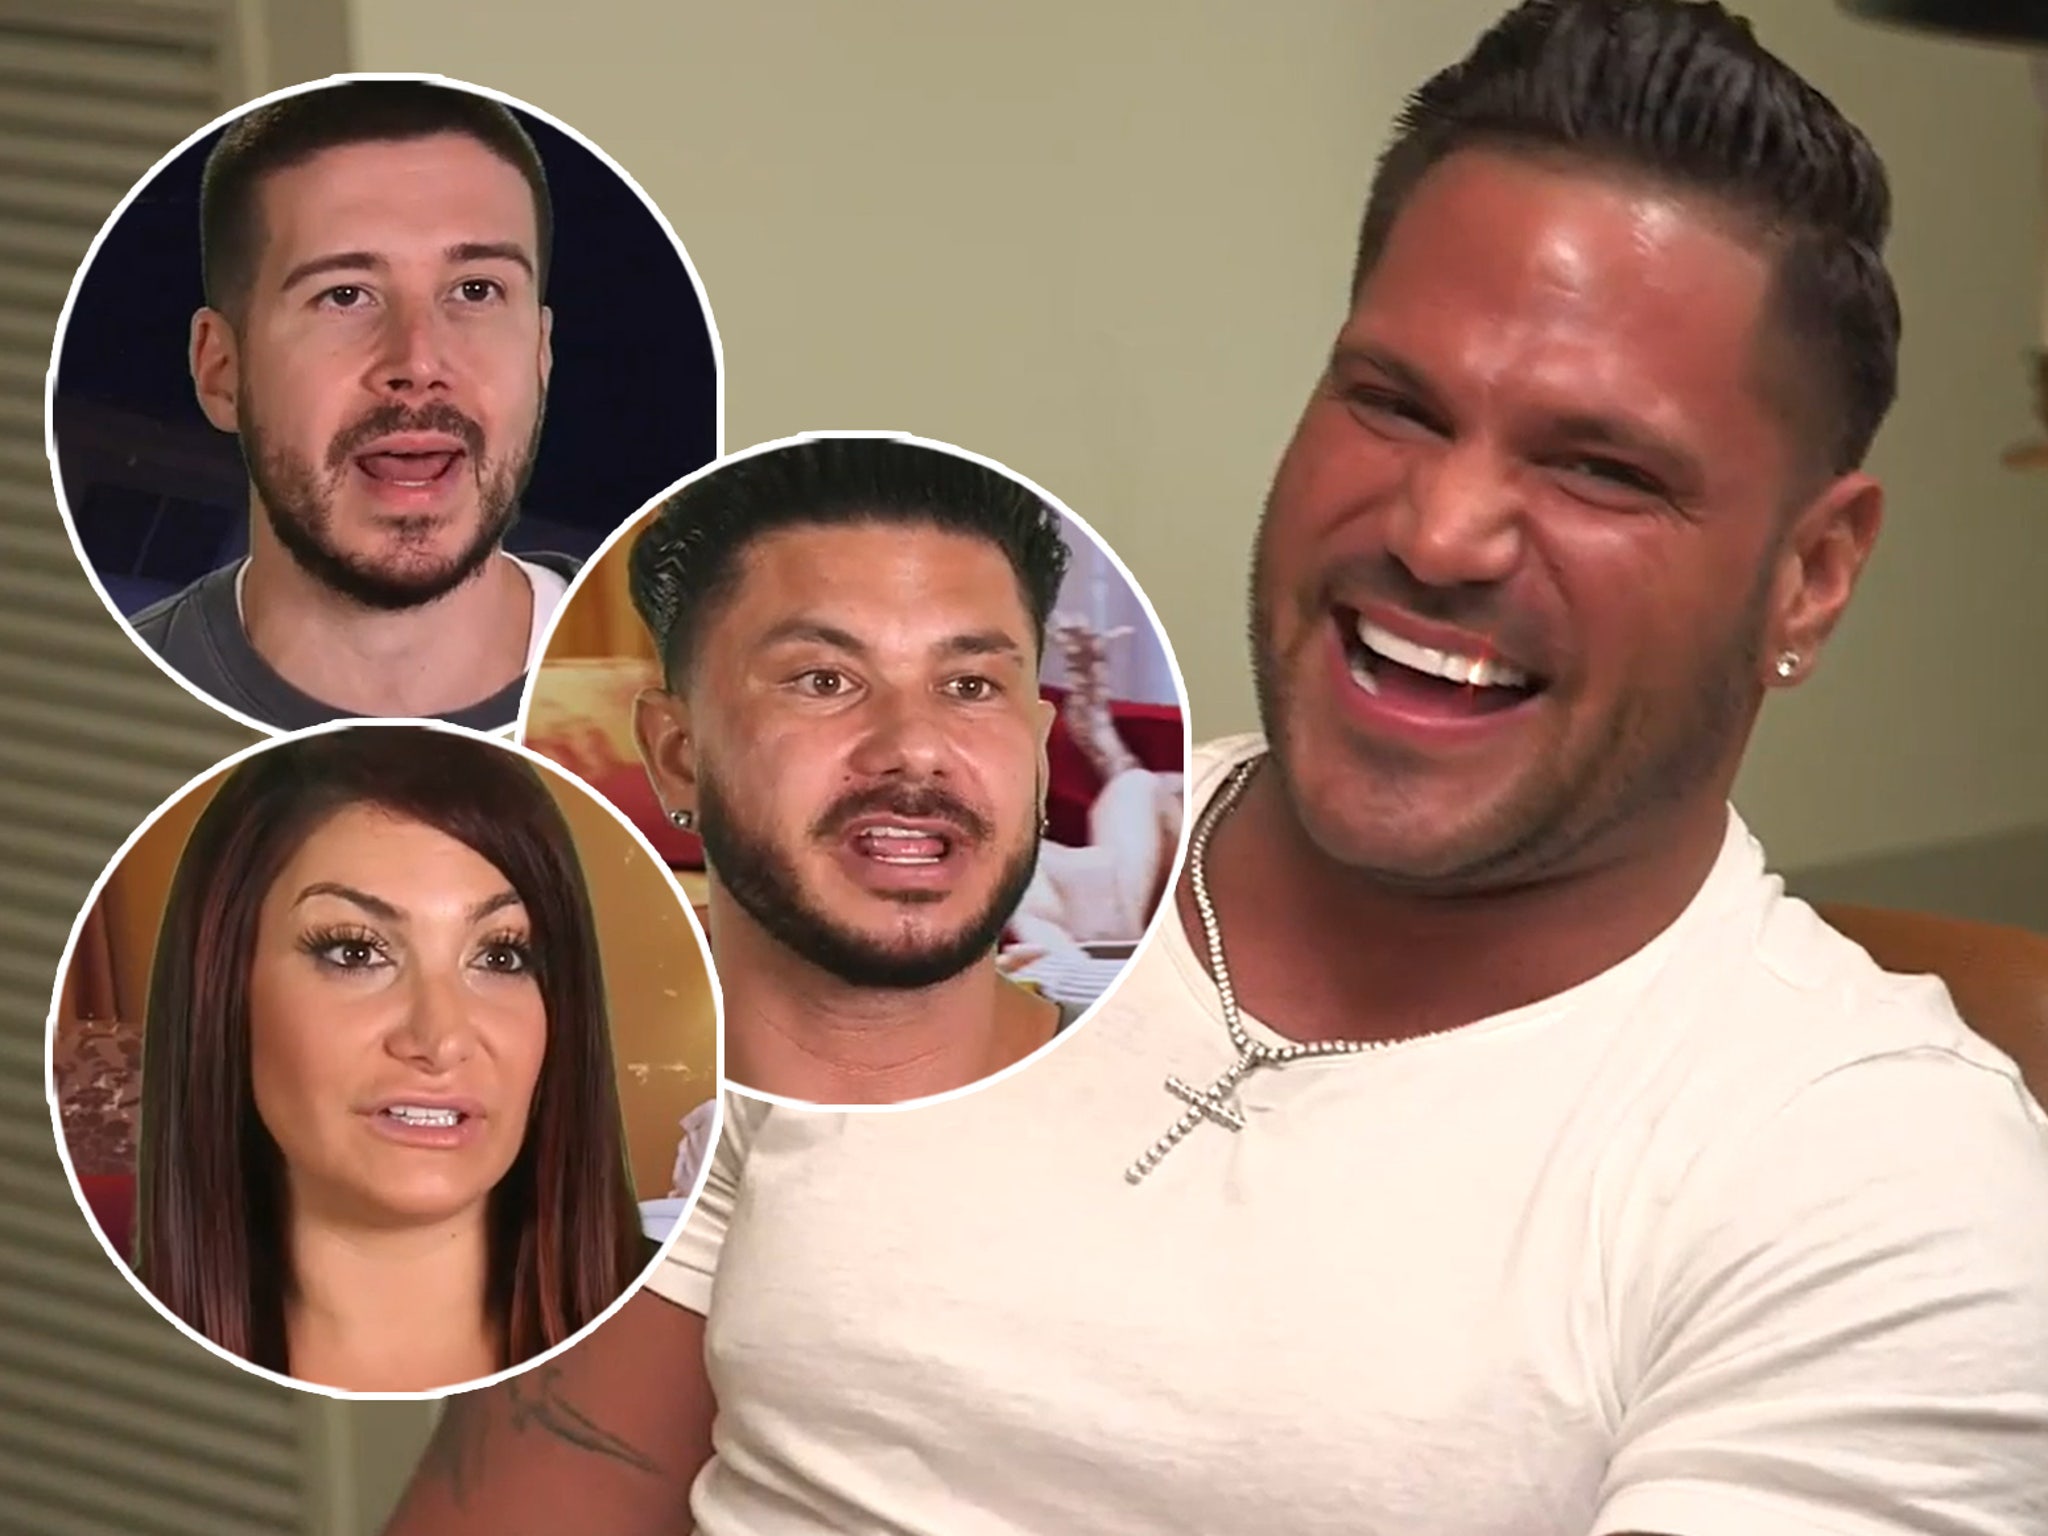 zitten item steek Jersey Shore Stars Struggle To Find New Woman For Single Ronnie